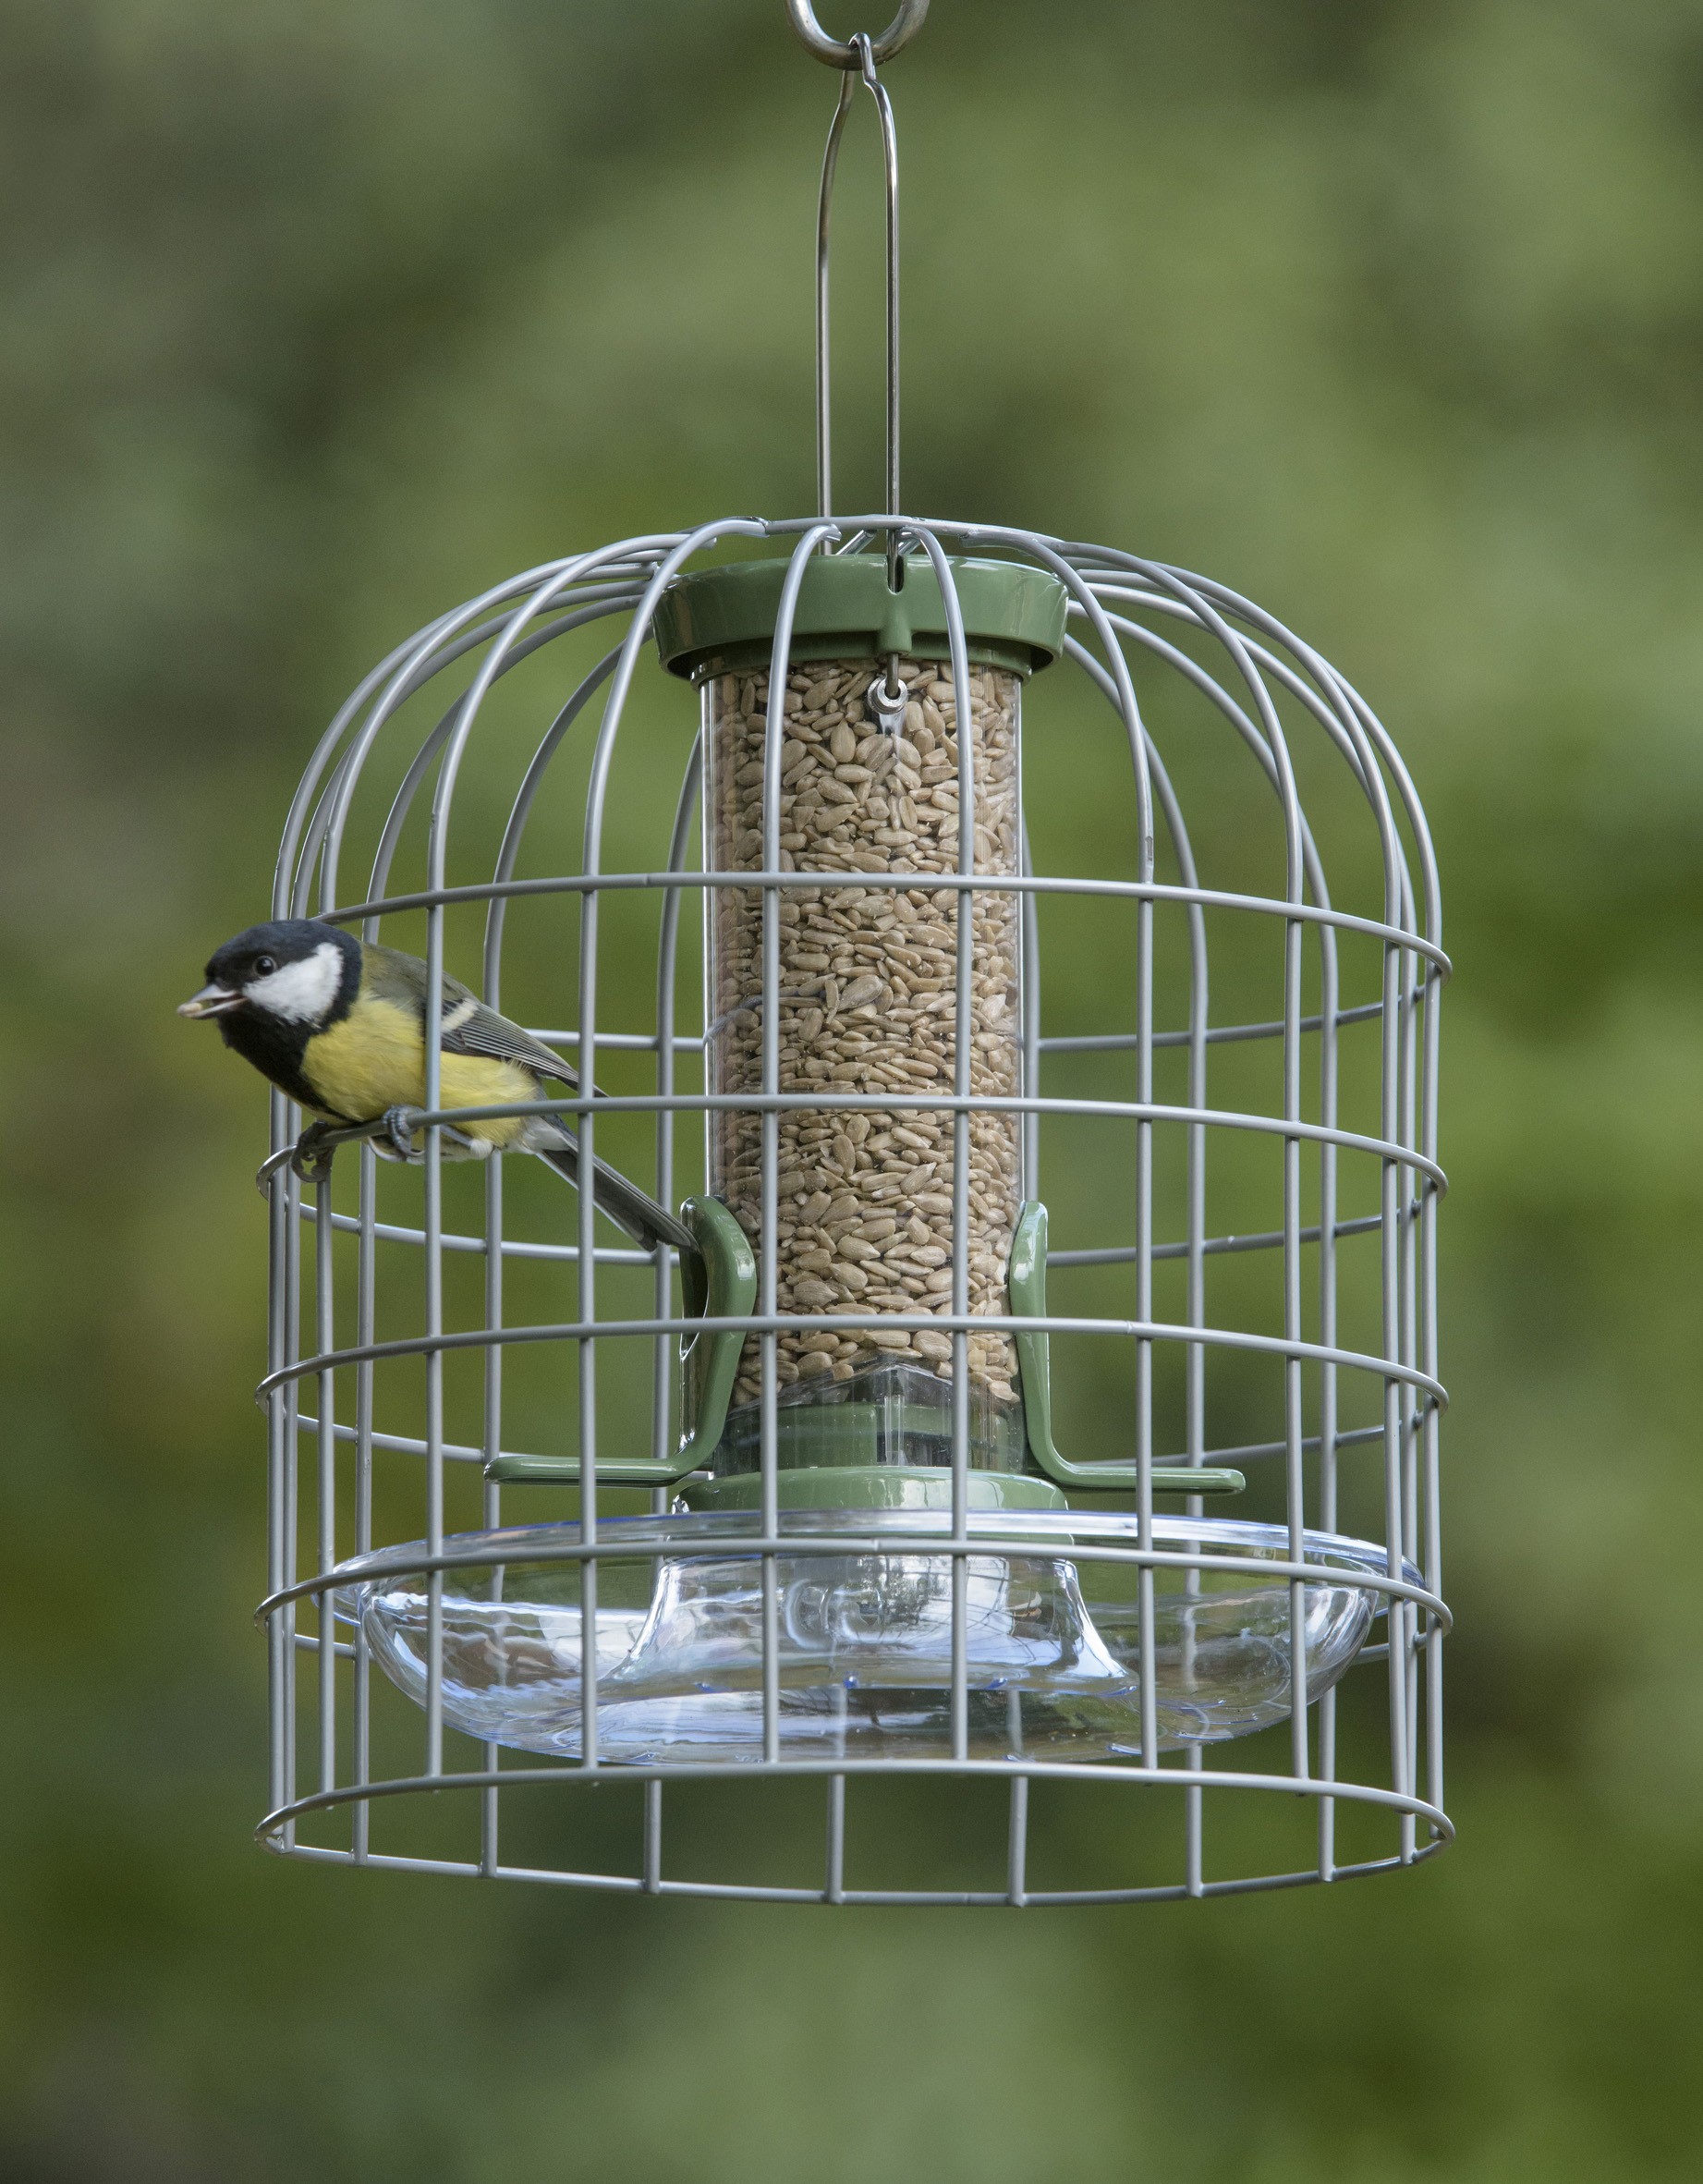 Great tit feeding on sunflower hearts from small feeder with guardian